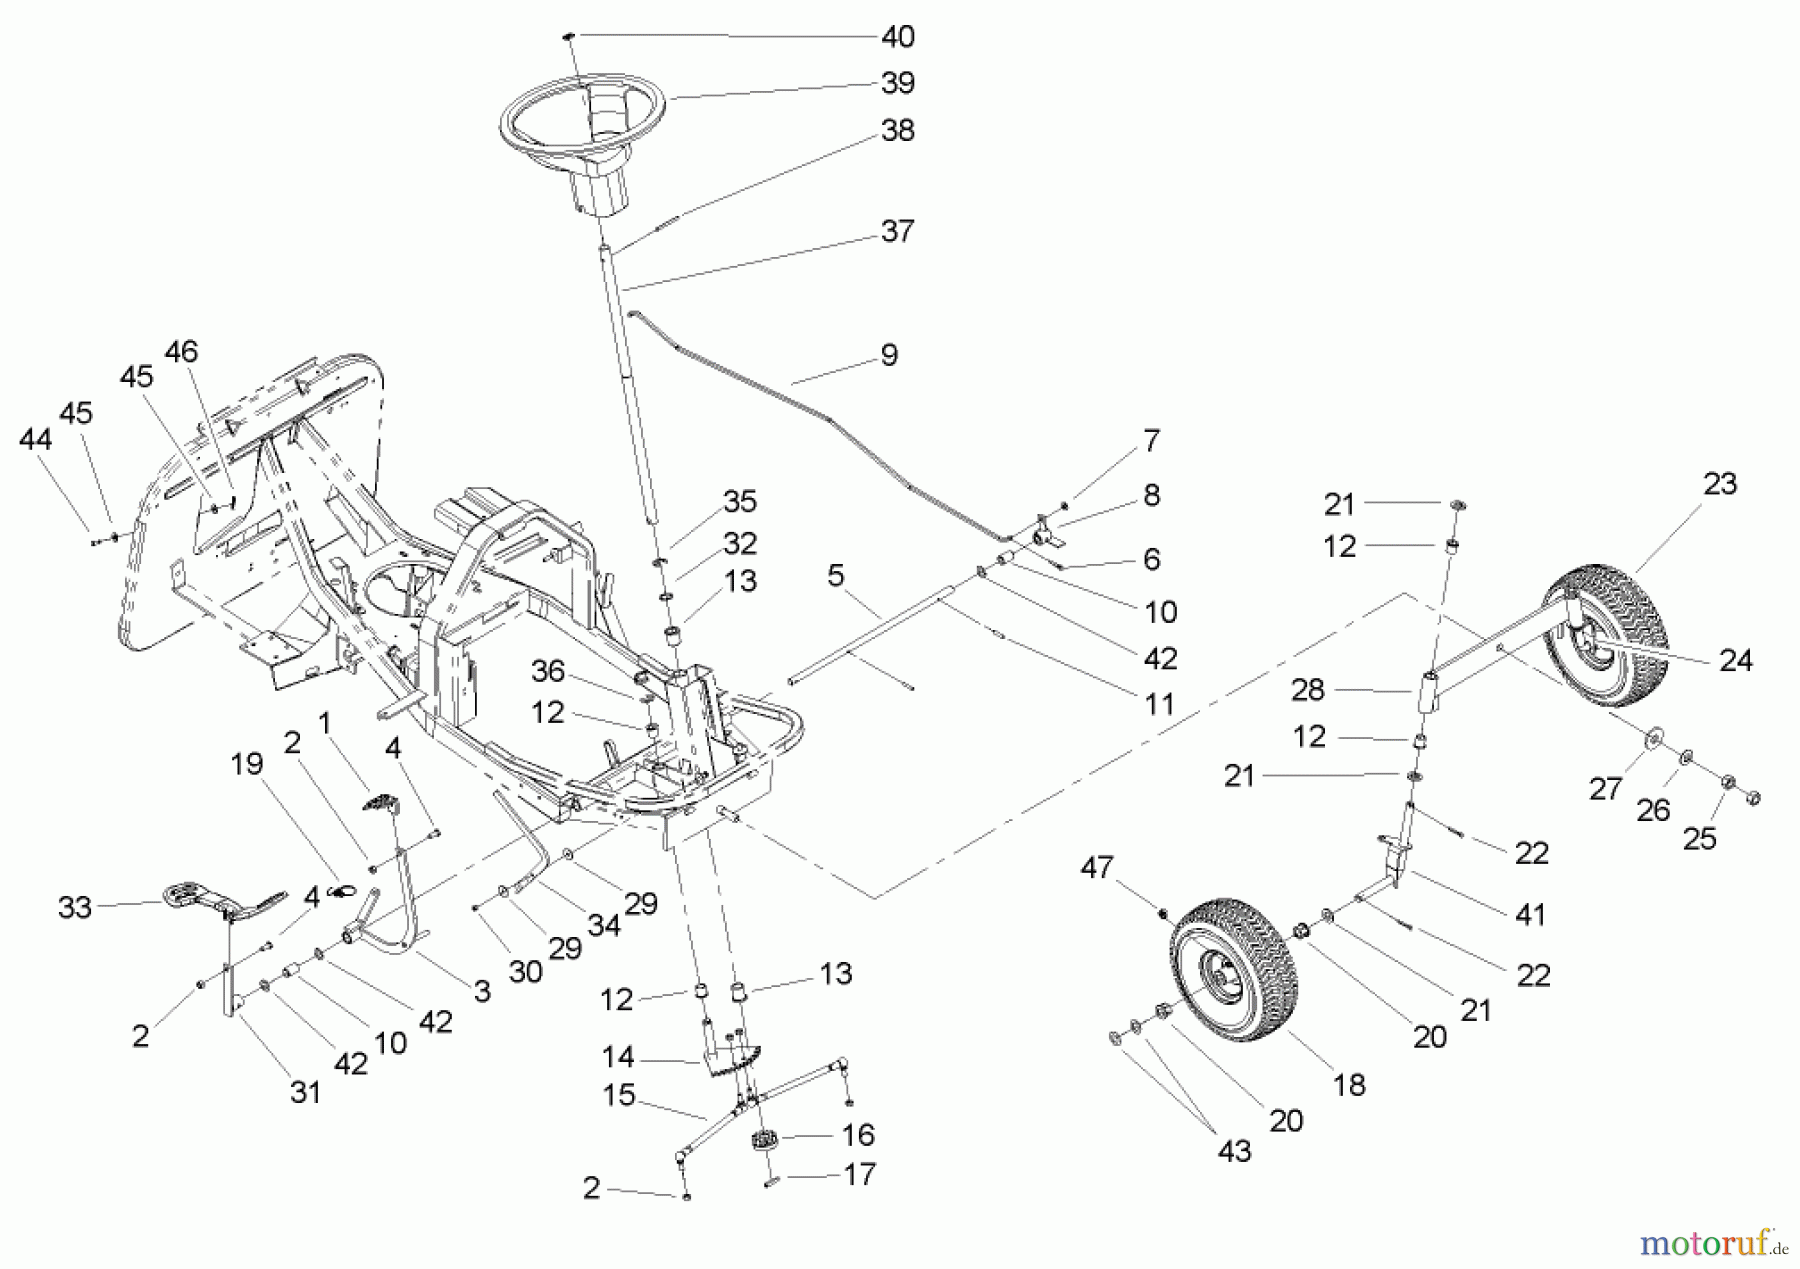  Toro Neu Mowers, Rear-Engine Rider 70186 (13-32H) - Toro 13-32H Rear-Engine Riding Mower, 2004 (240000001-240999999) FRONT AXLE AND STEERING ASSEMBLY